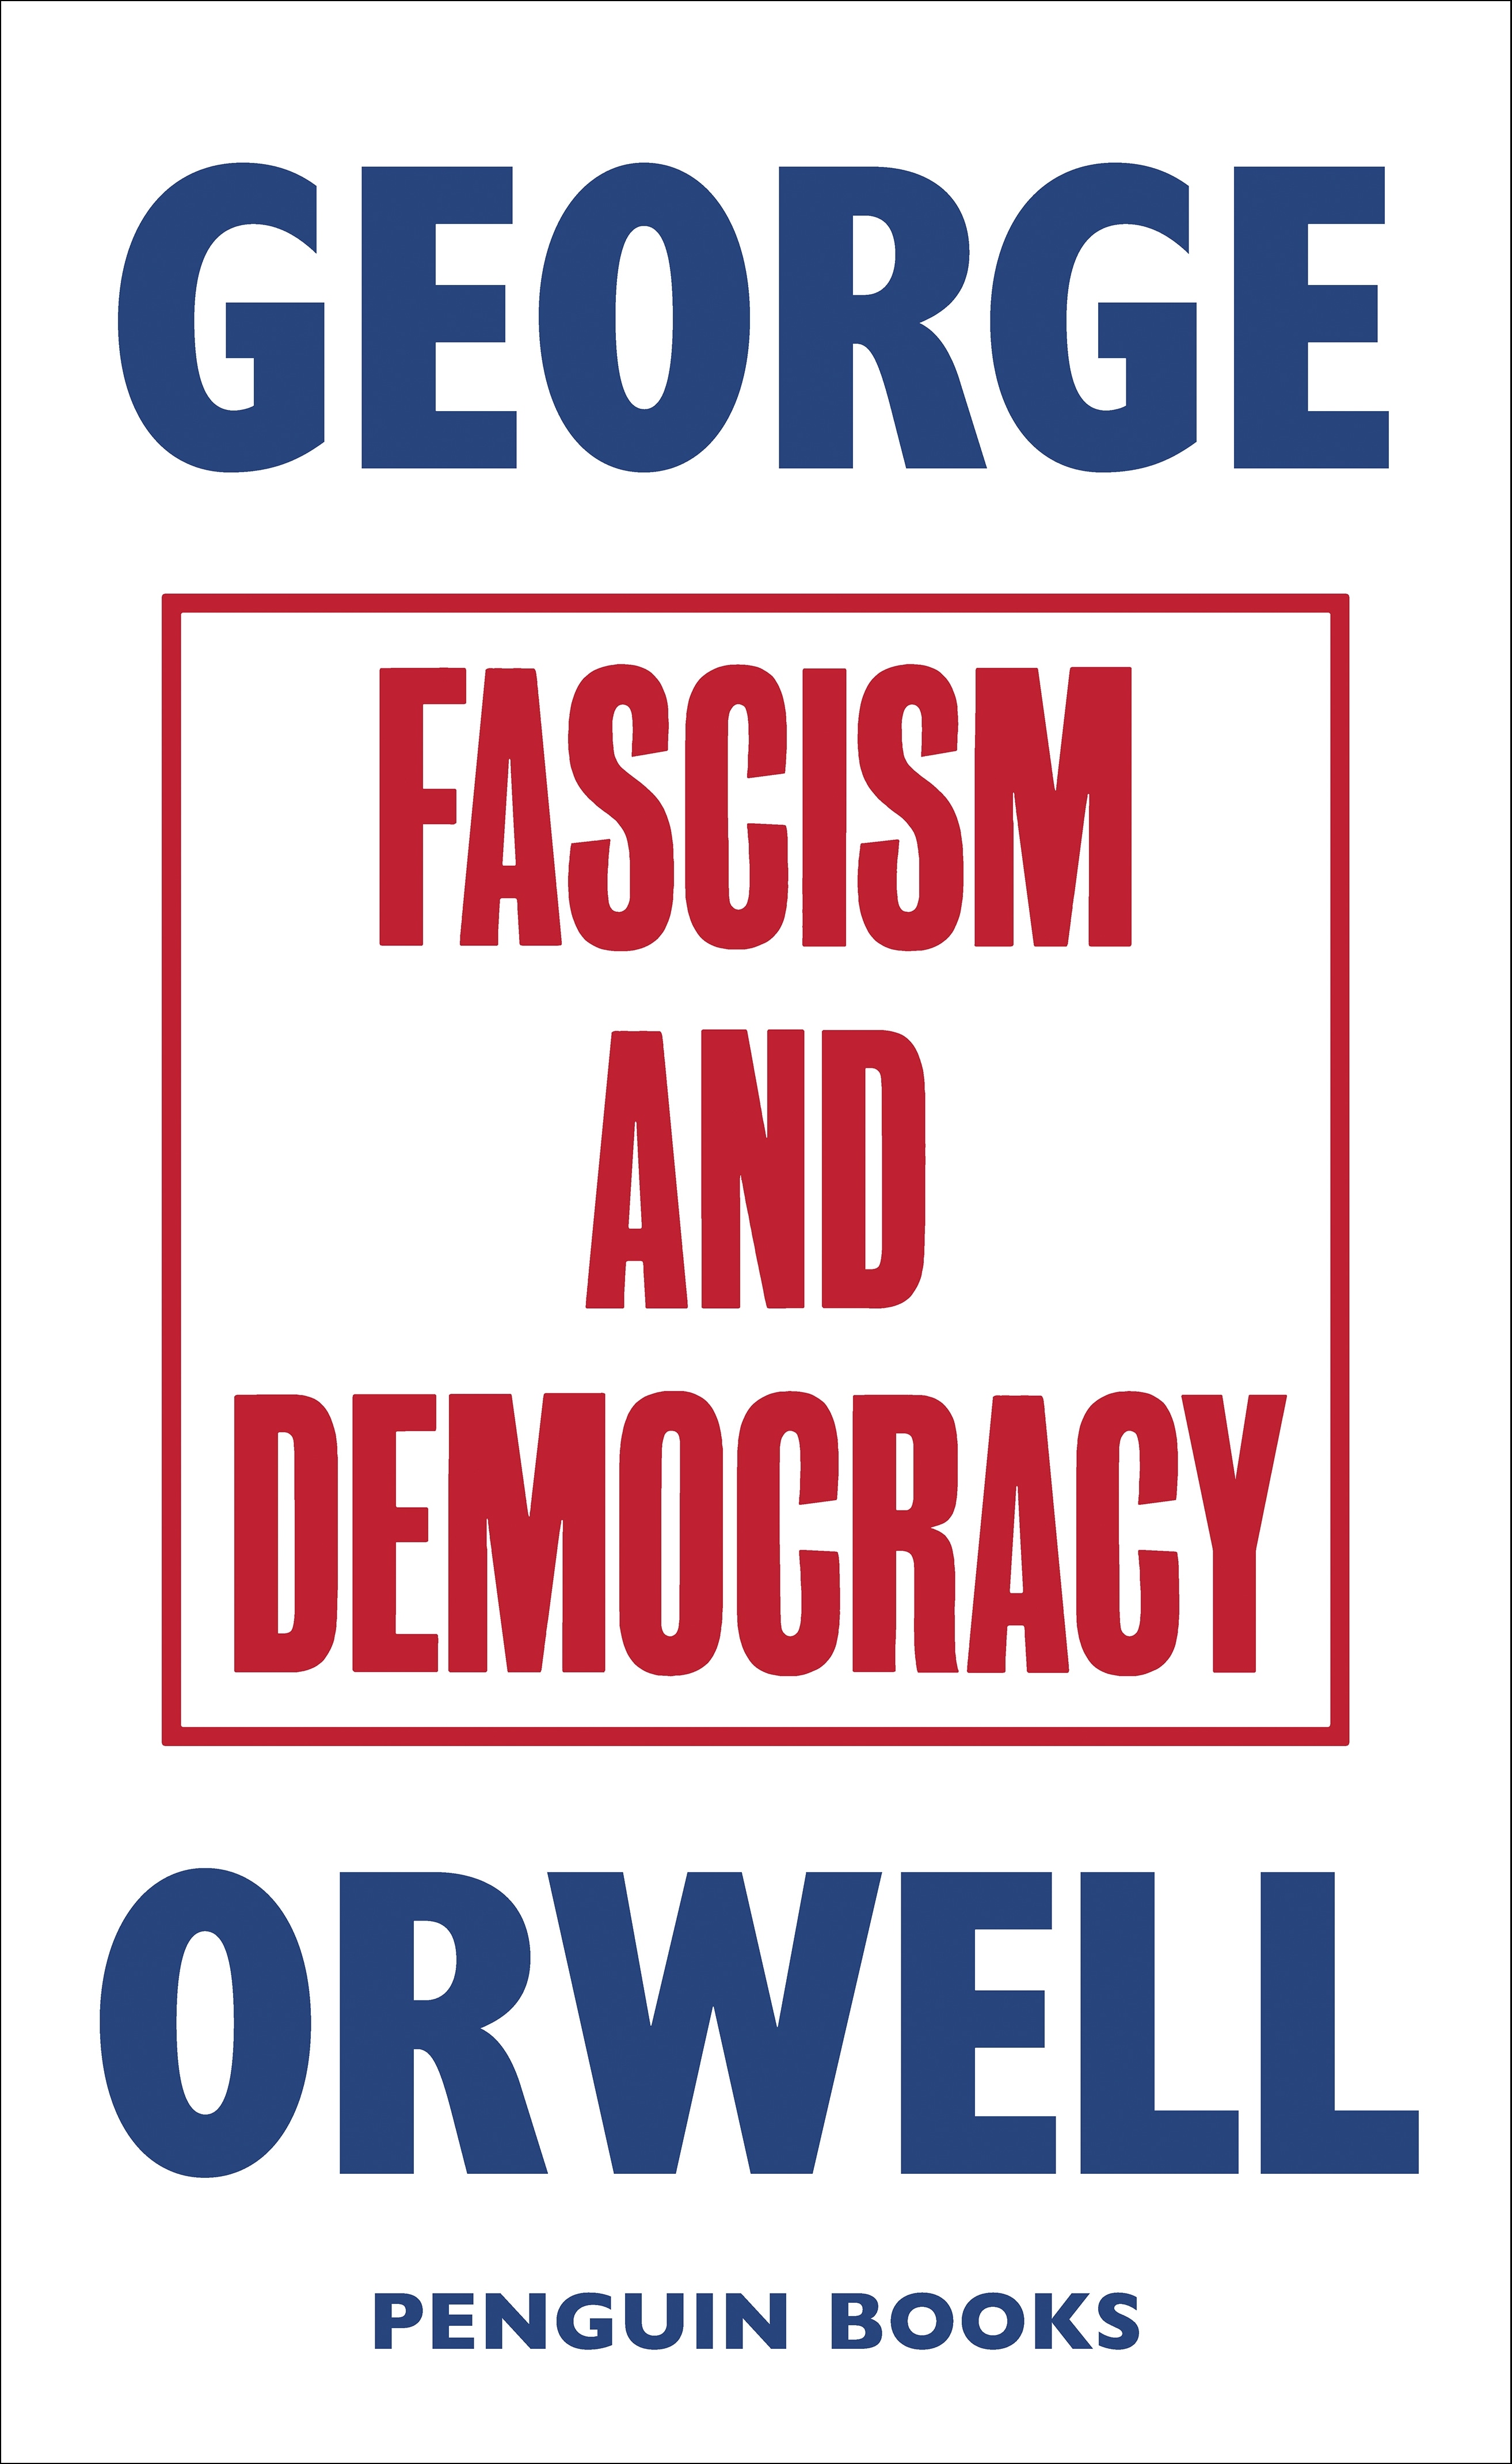 Book “Fascism and Democracy” by George Orwell — January 21, 2020